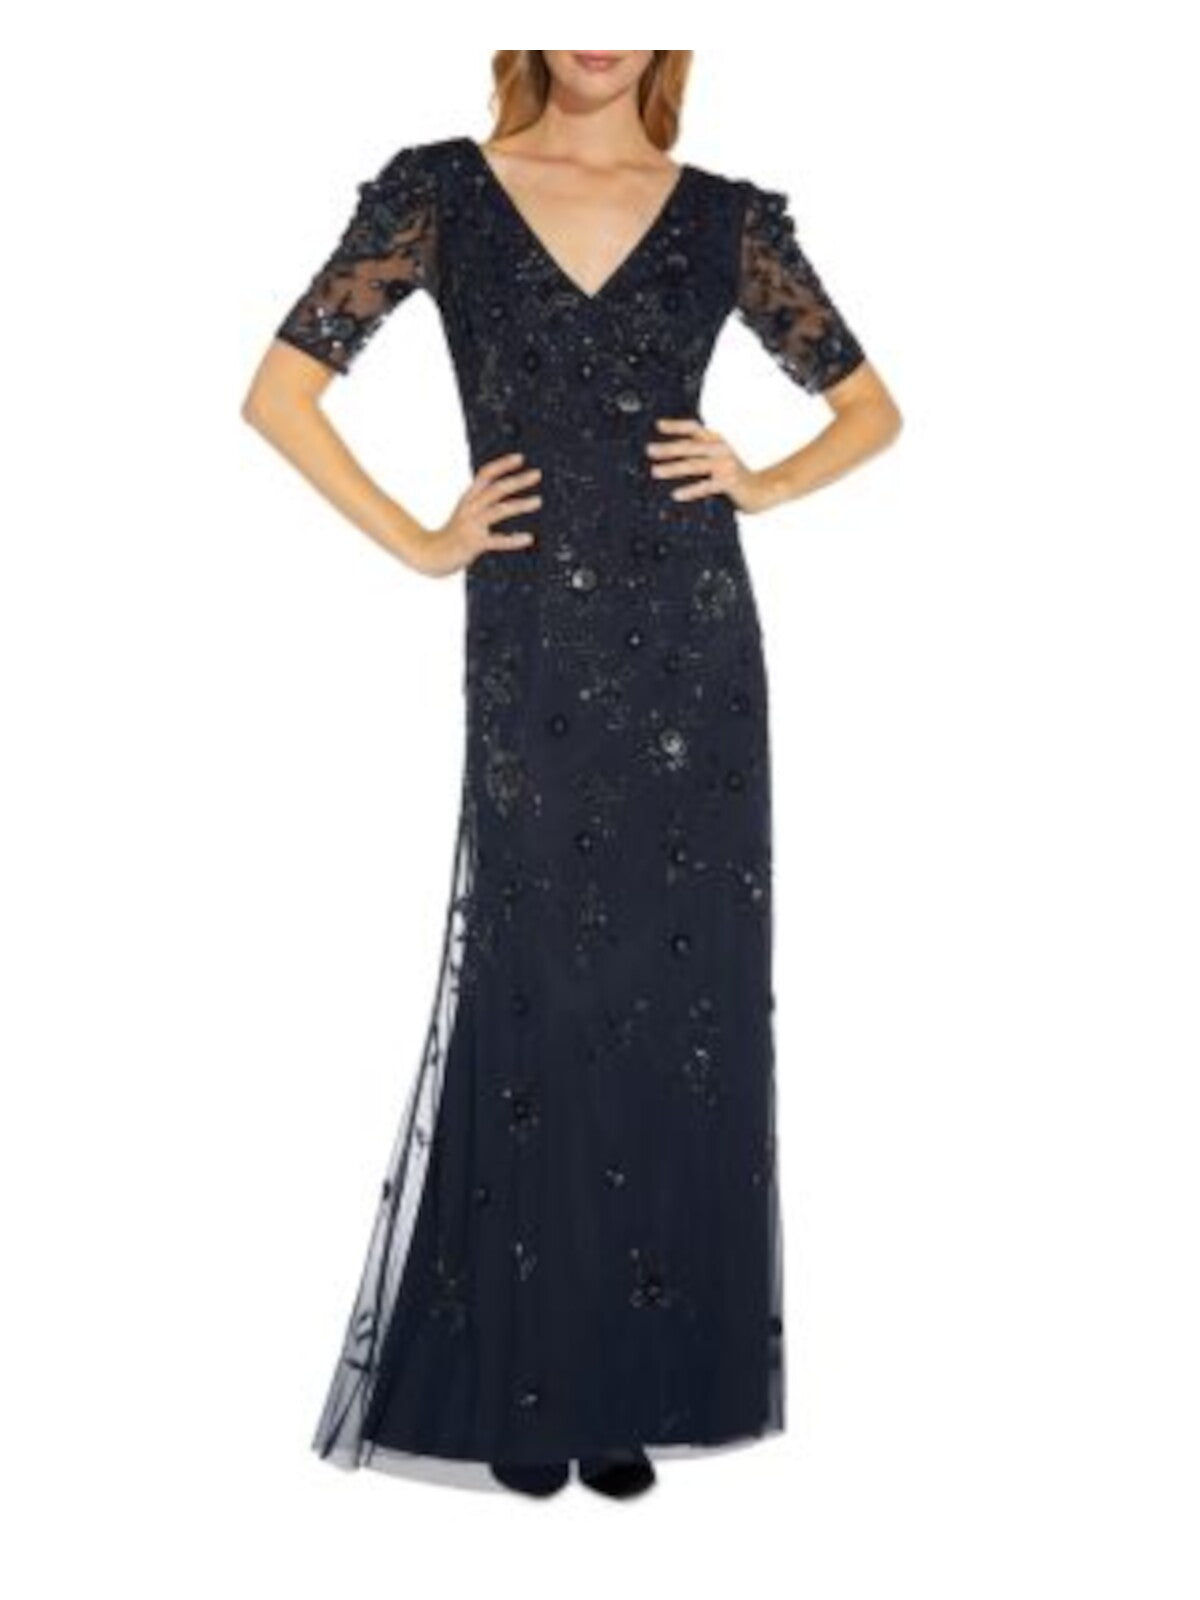 ADRIANNA PAPELL Womens Navy Embellished Zippered Sheer Lined Short Sleeve Surplice Neckline Full-Length Evening Gown Dress 8